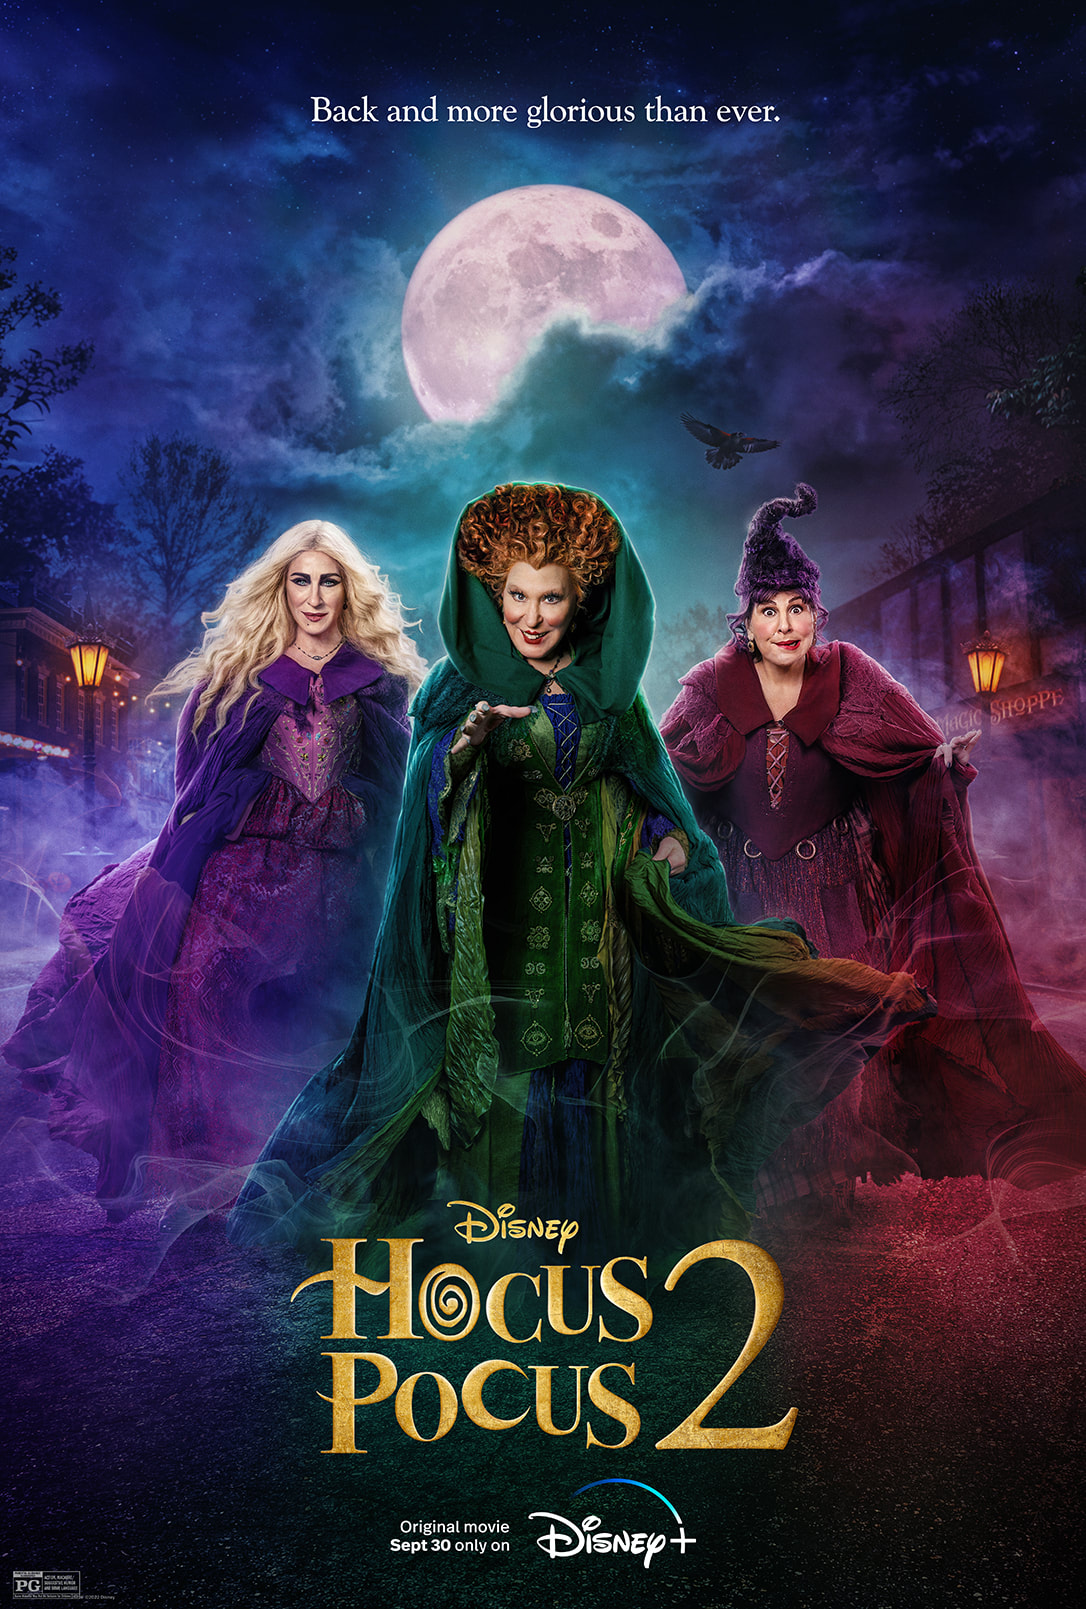 Hocus Pocus 2 streaming on Disney+ September 30th My Life is a